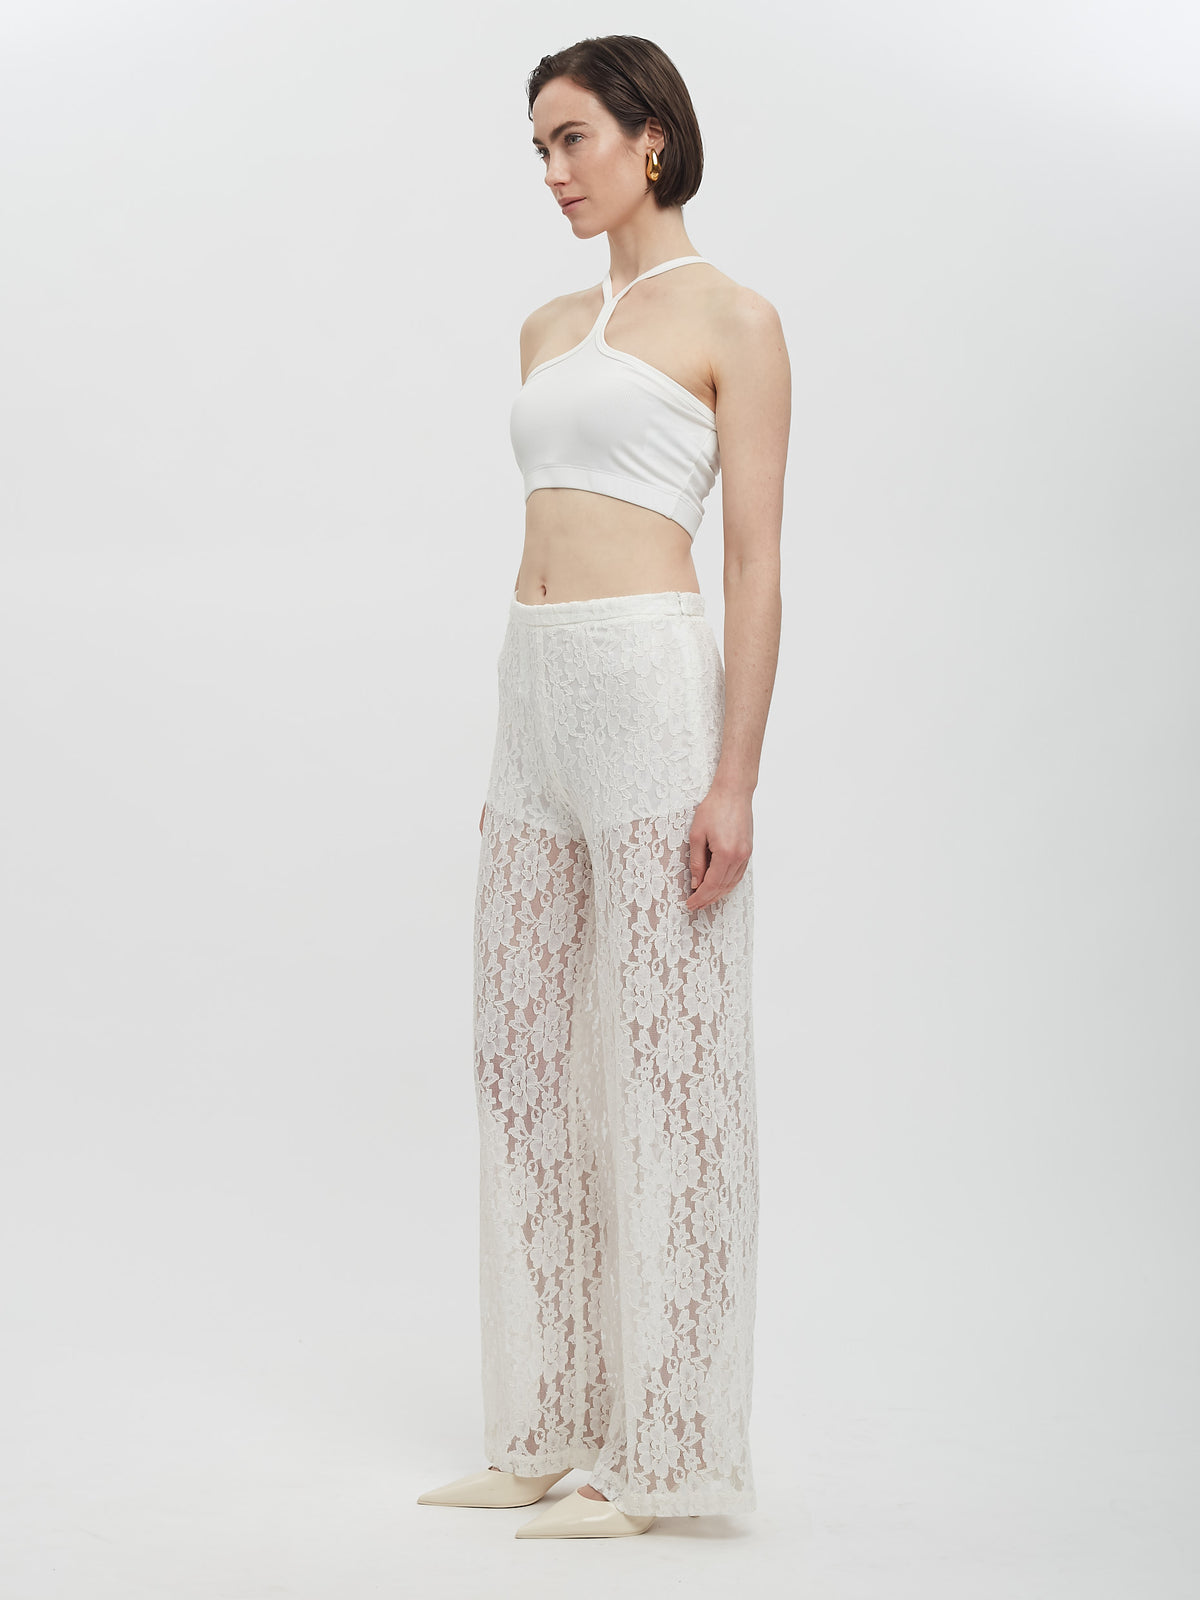 Lace Trousers